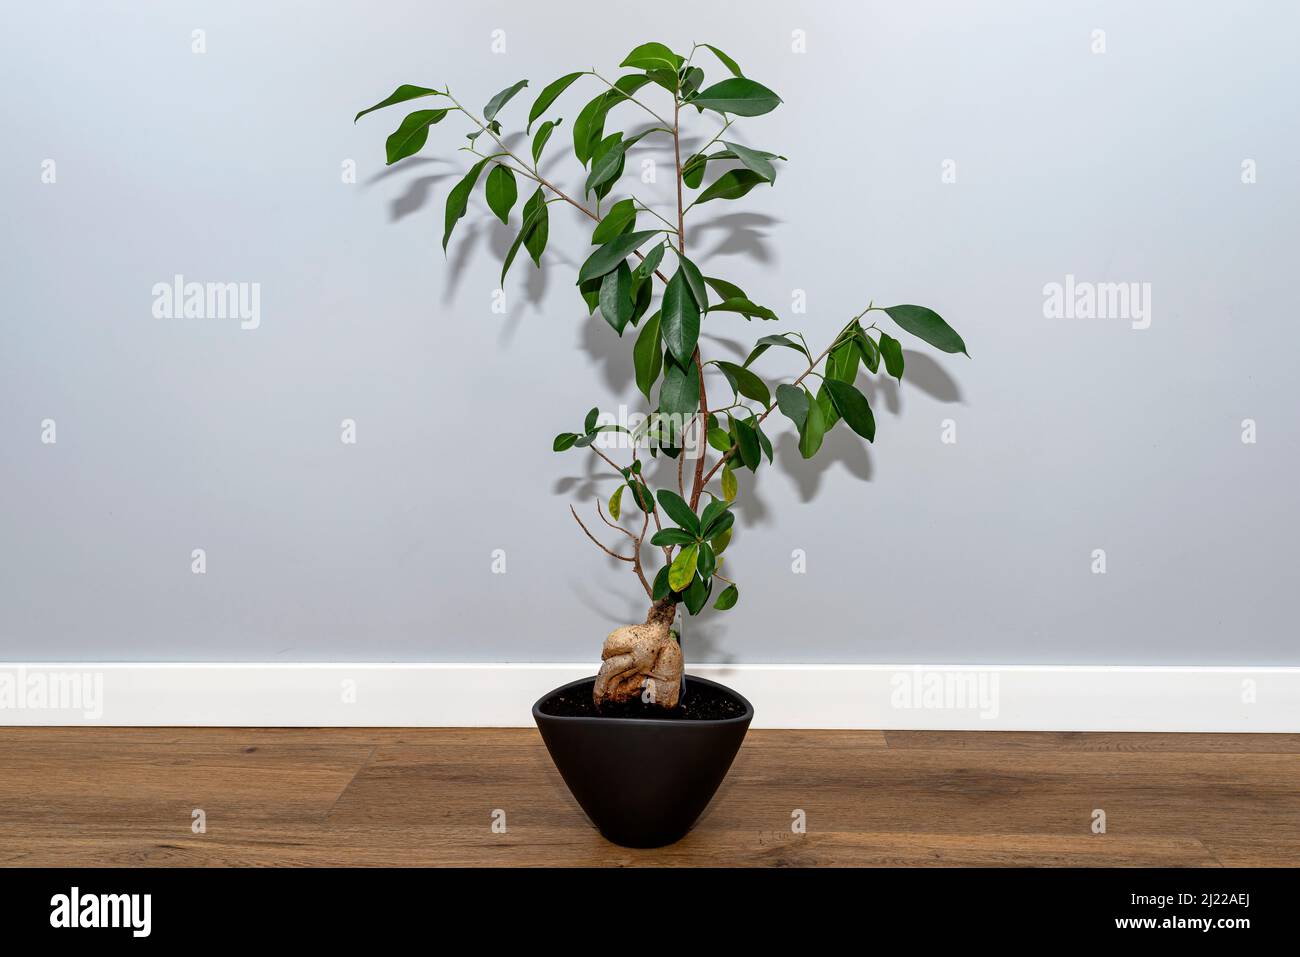 A beautiful, large bonsai tree in a black pot with liquid flower conditioner, standing on vinyl panels. Stock Photo